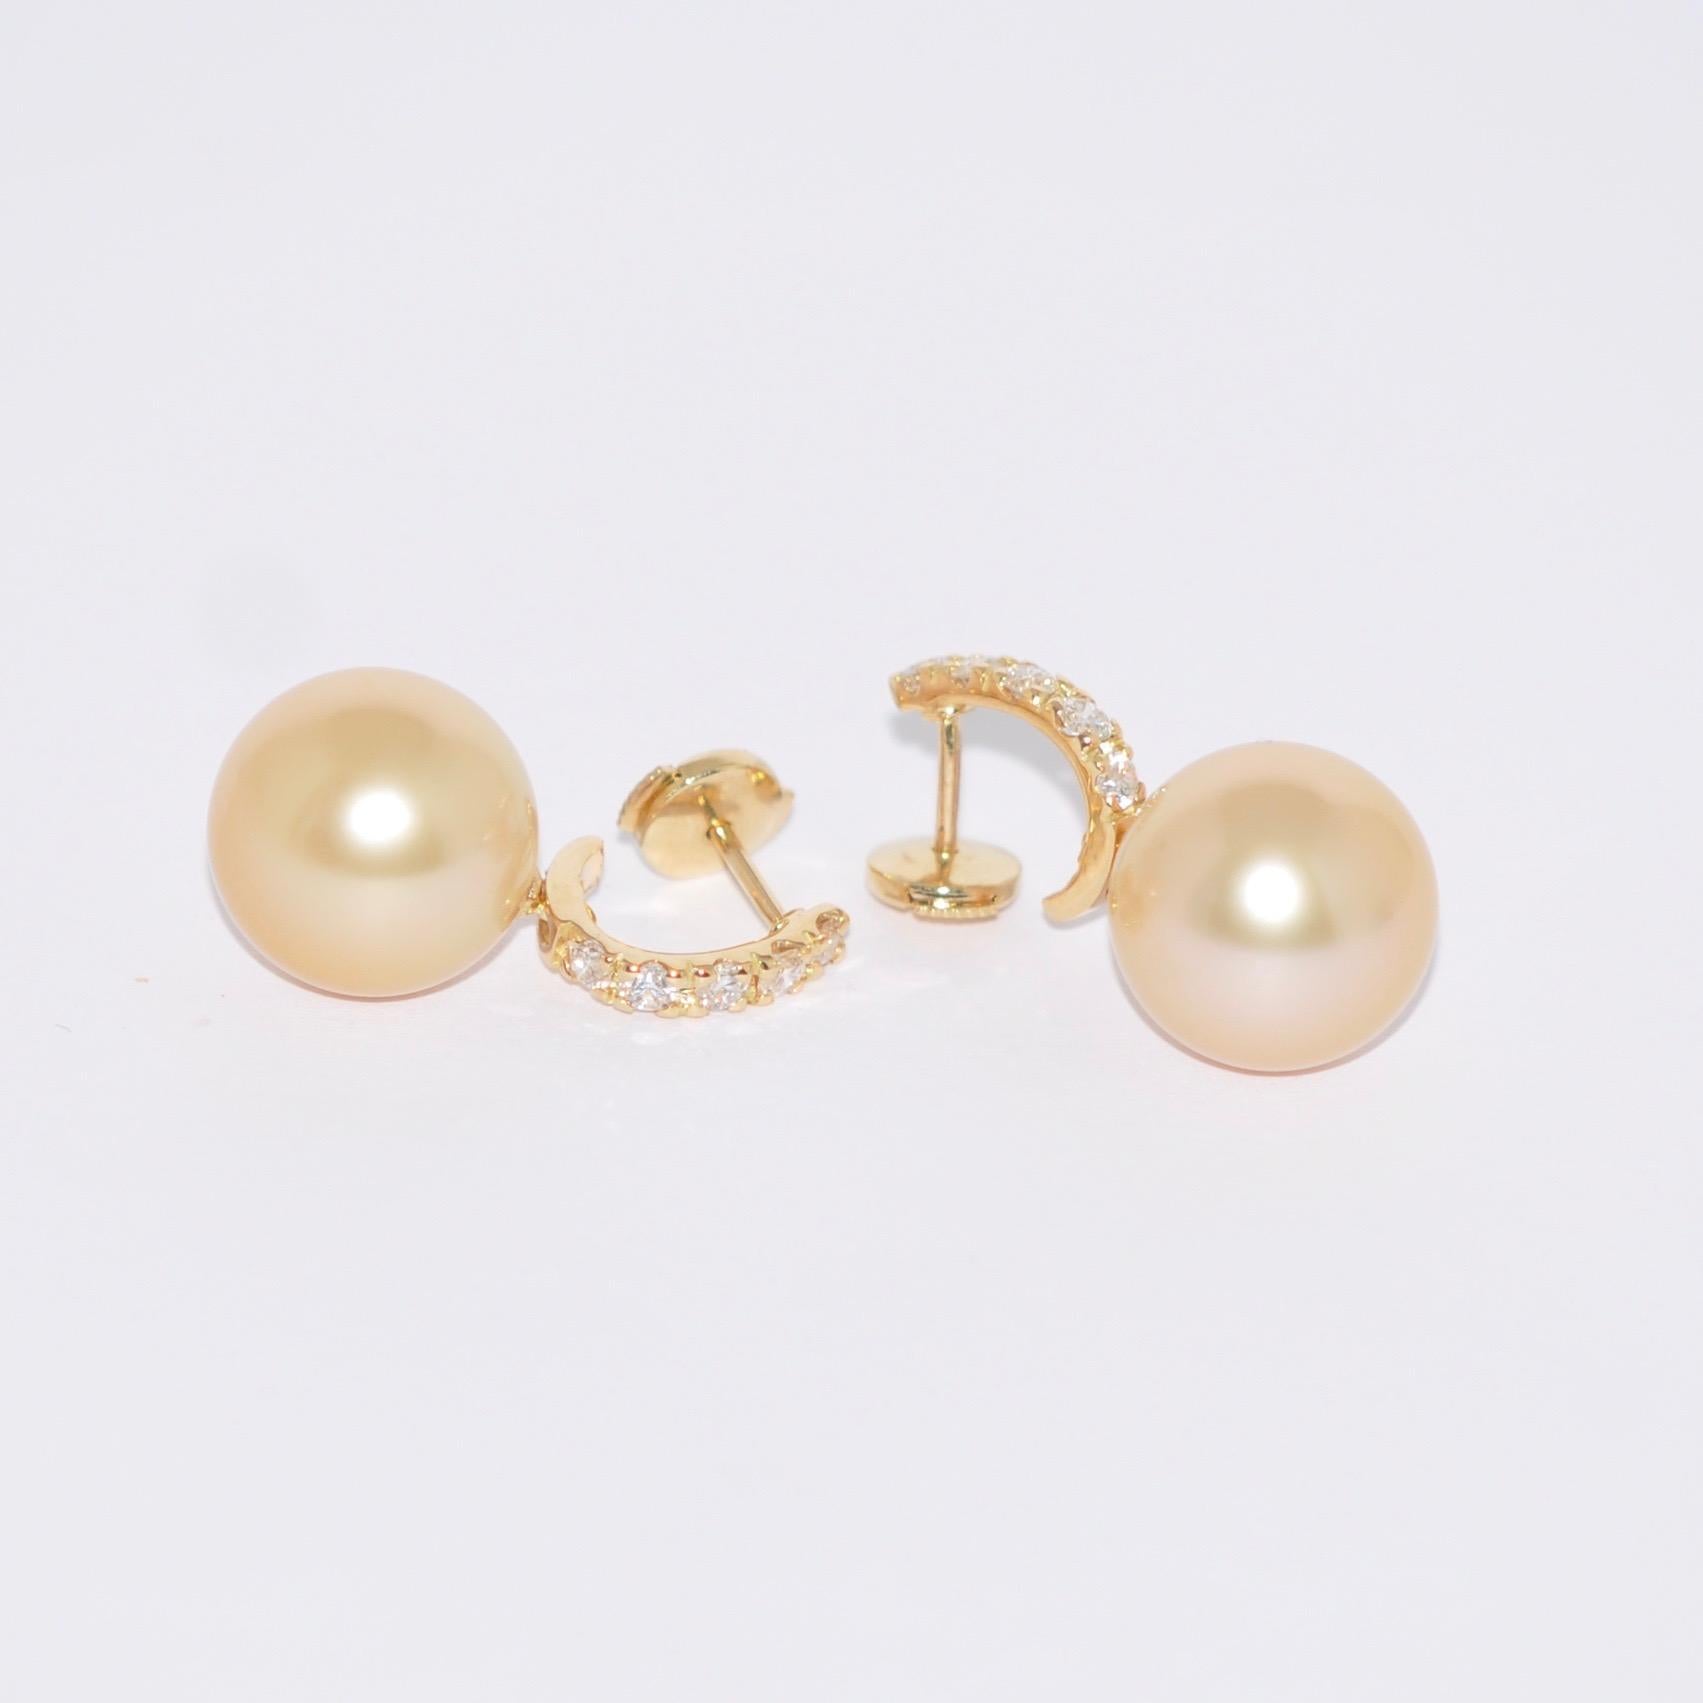 Discover these stunning South Sea pearl and white diamond dangle earrings, meticulously crafted in 18-carat yellow gold. These exquisite jewels evoke classic style and add a touch of glamour to any outfit, whether for a special occasion or simply to